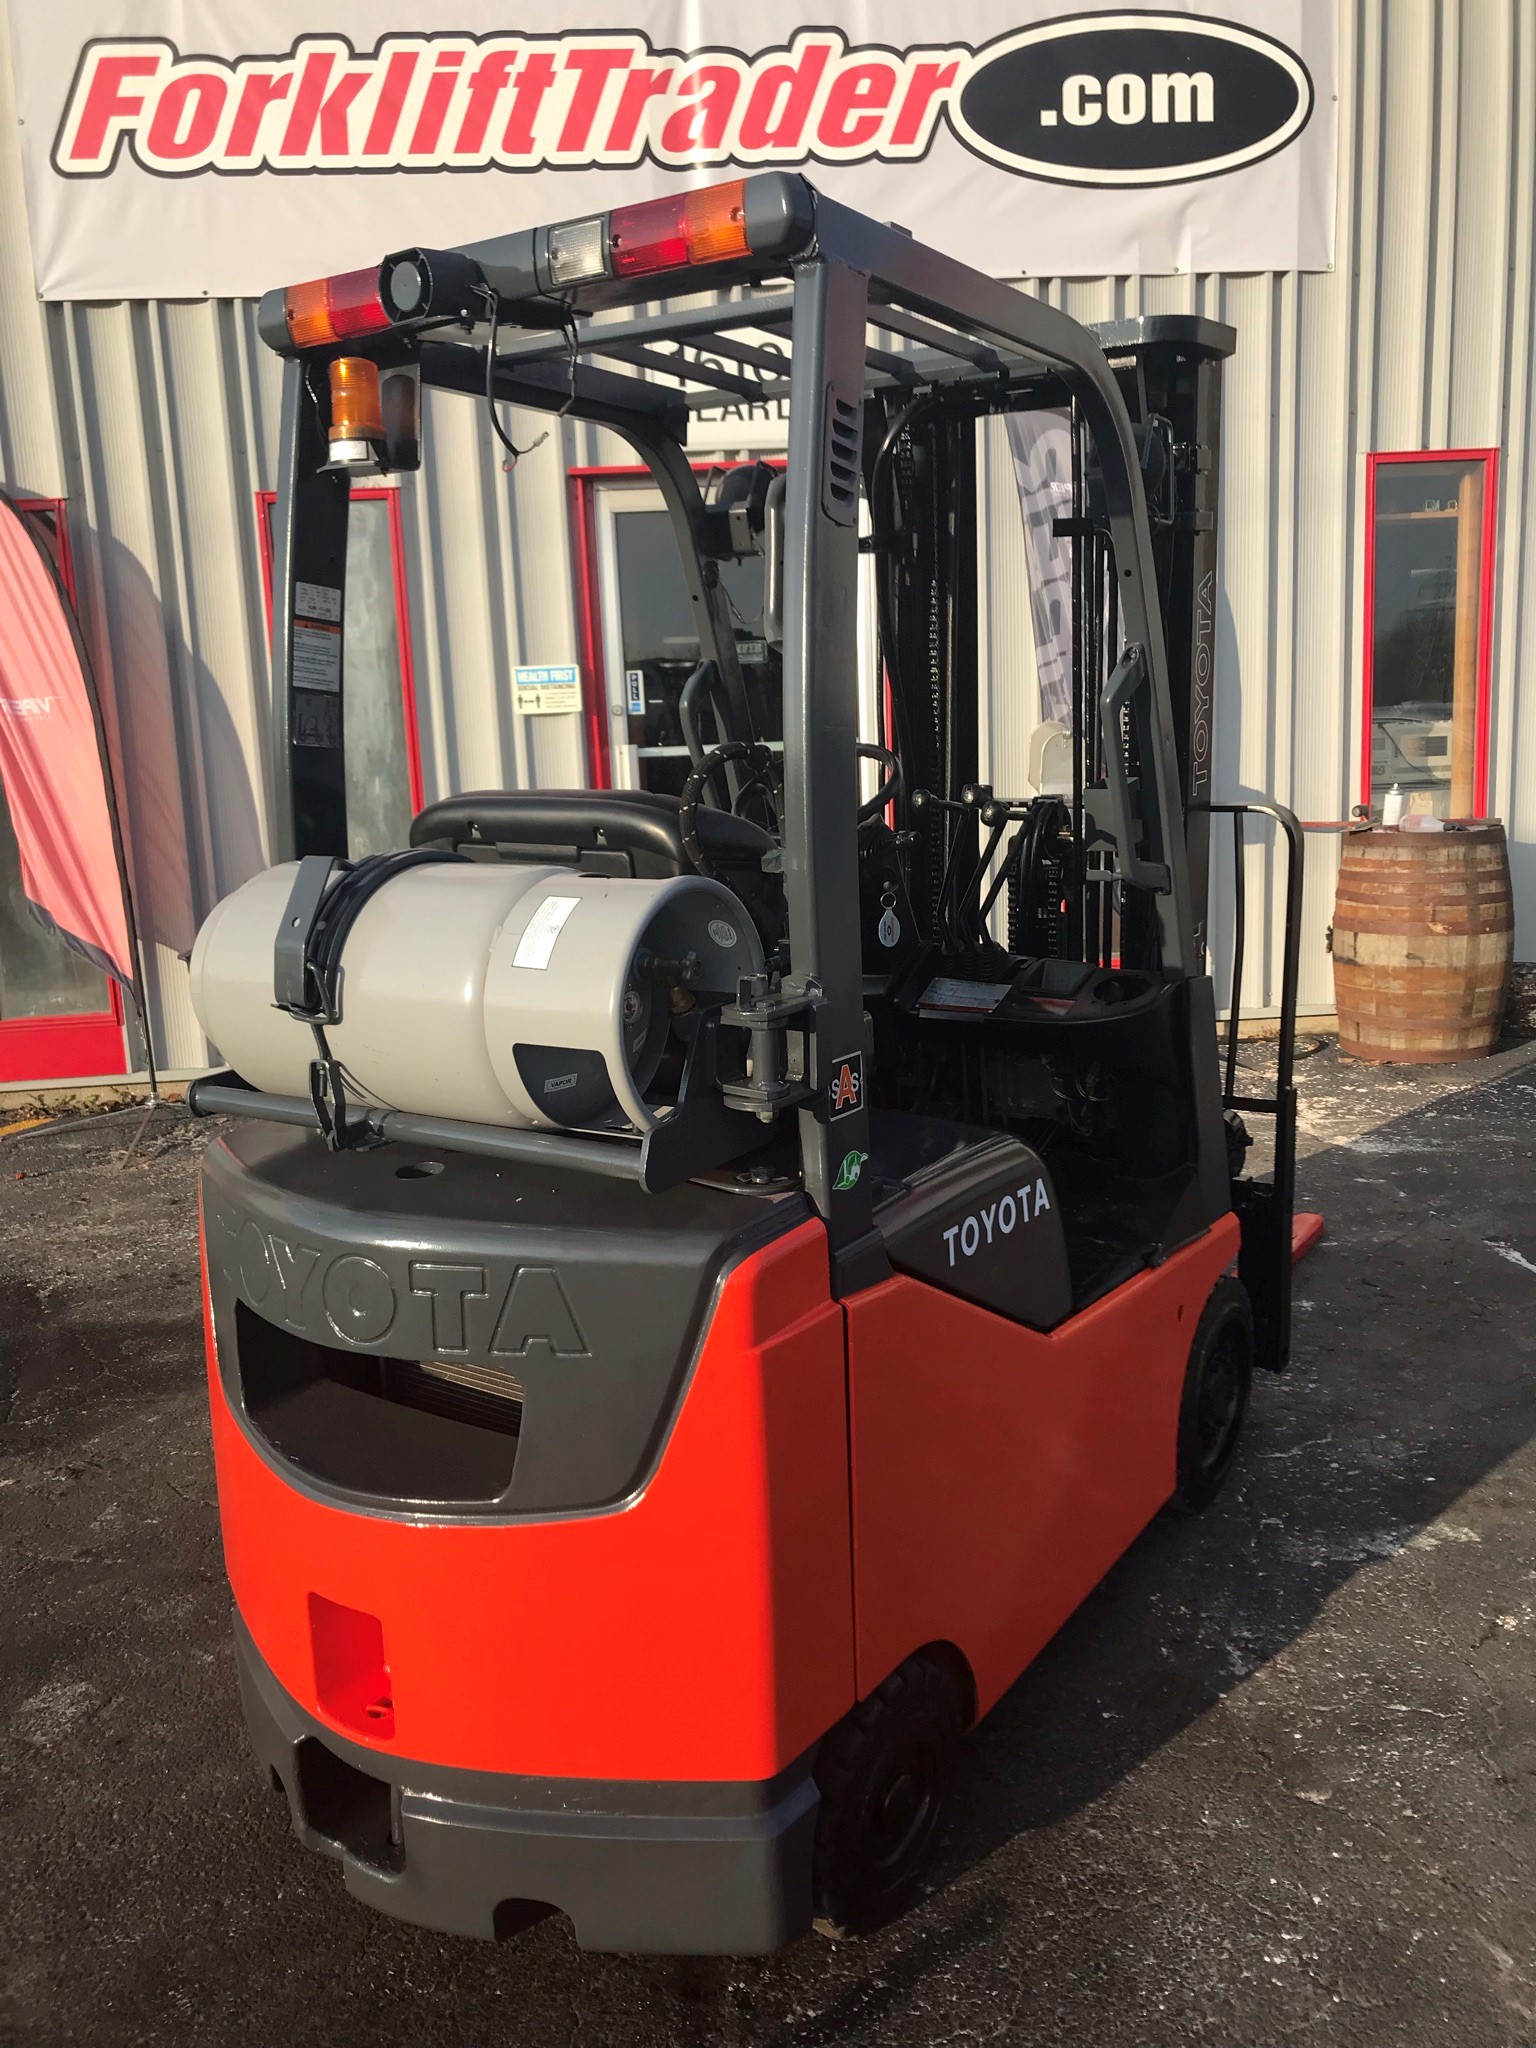 Red 2011 toyota forklift with 3,000lb capacity for sale